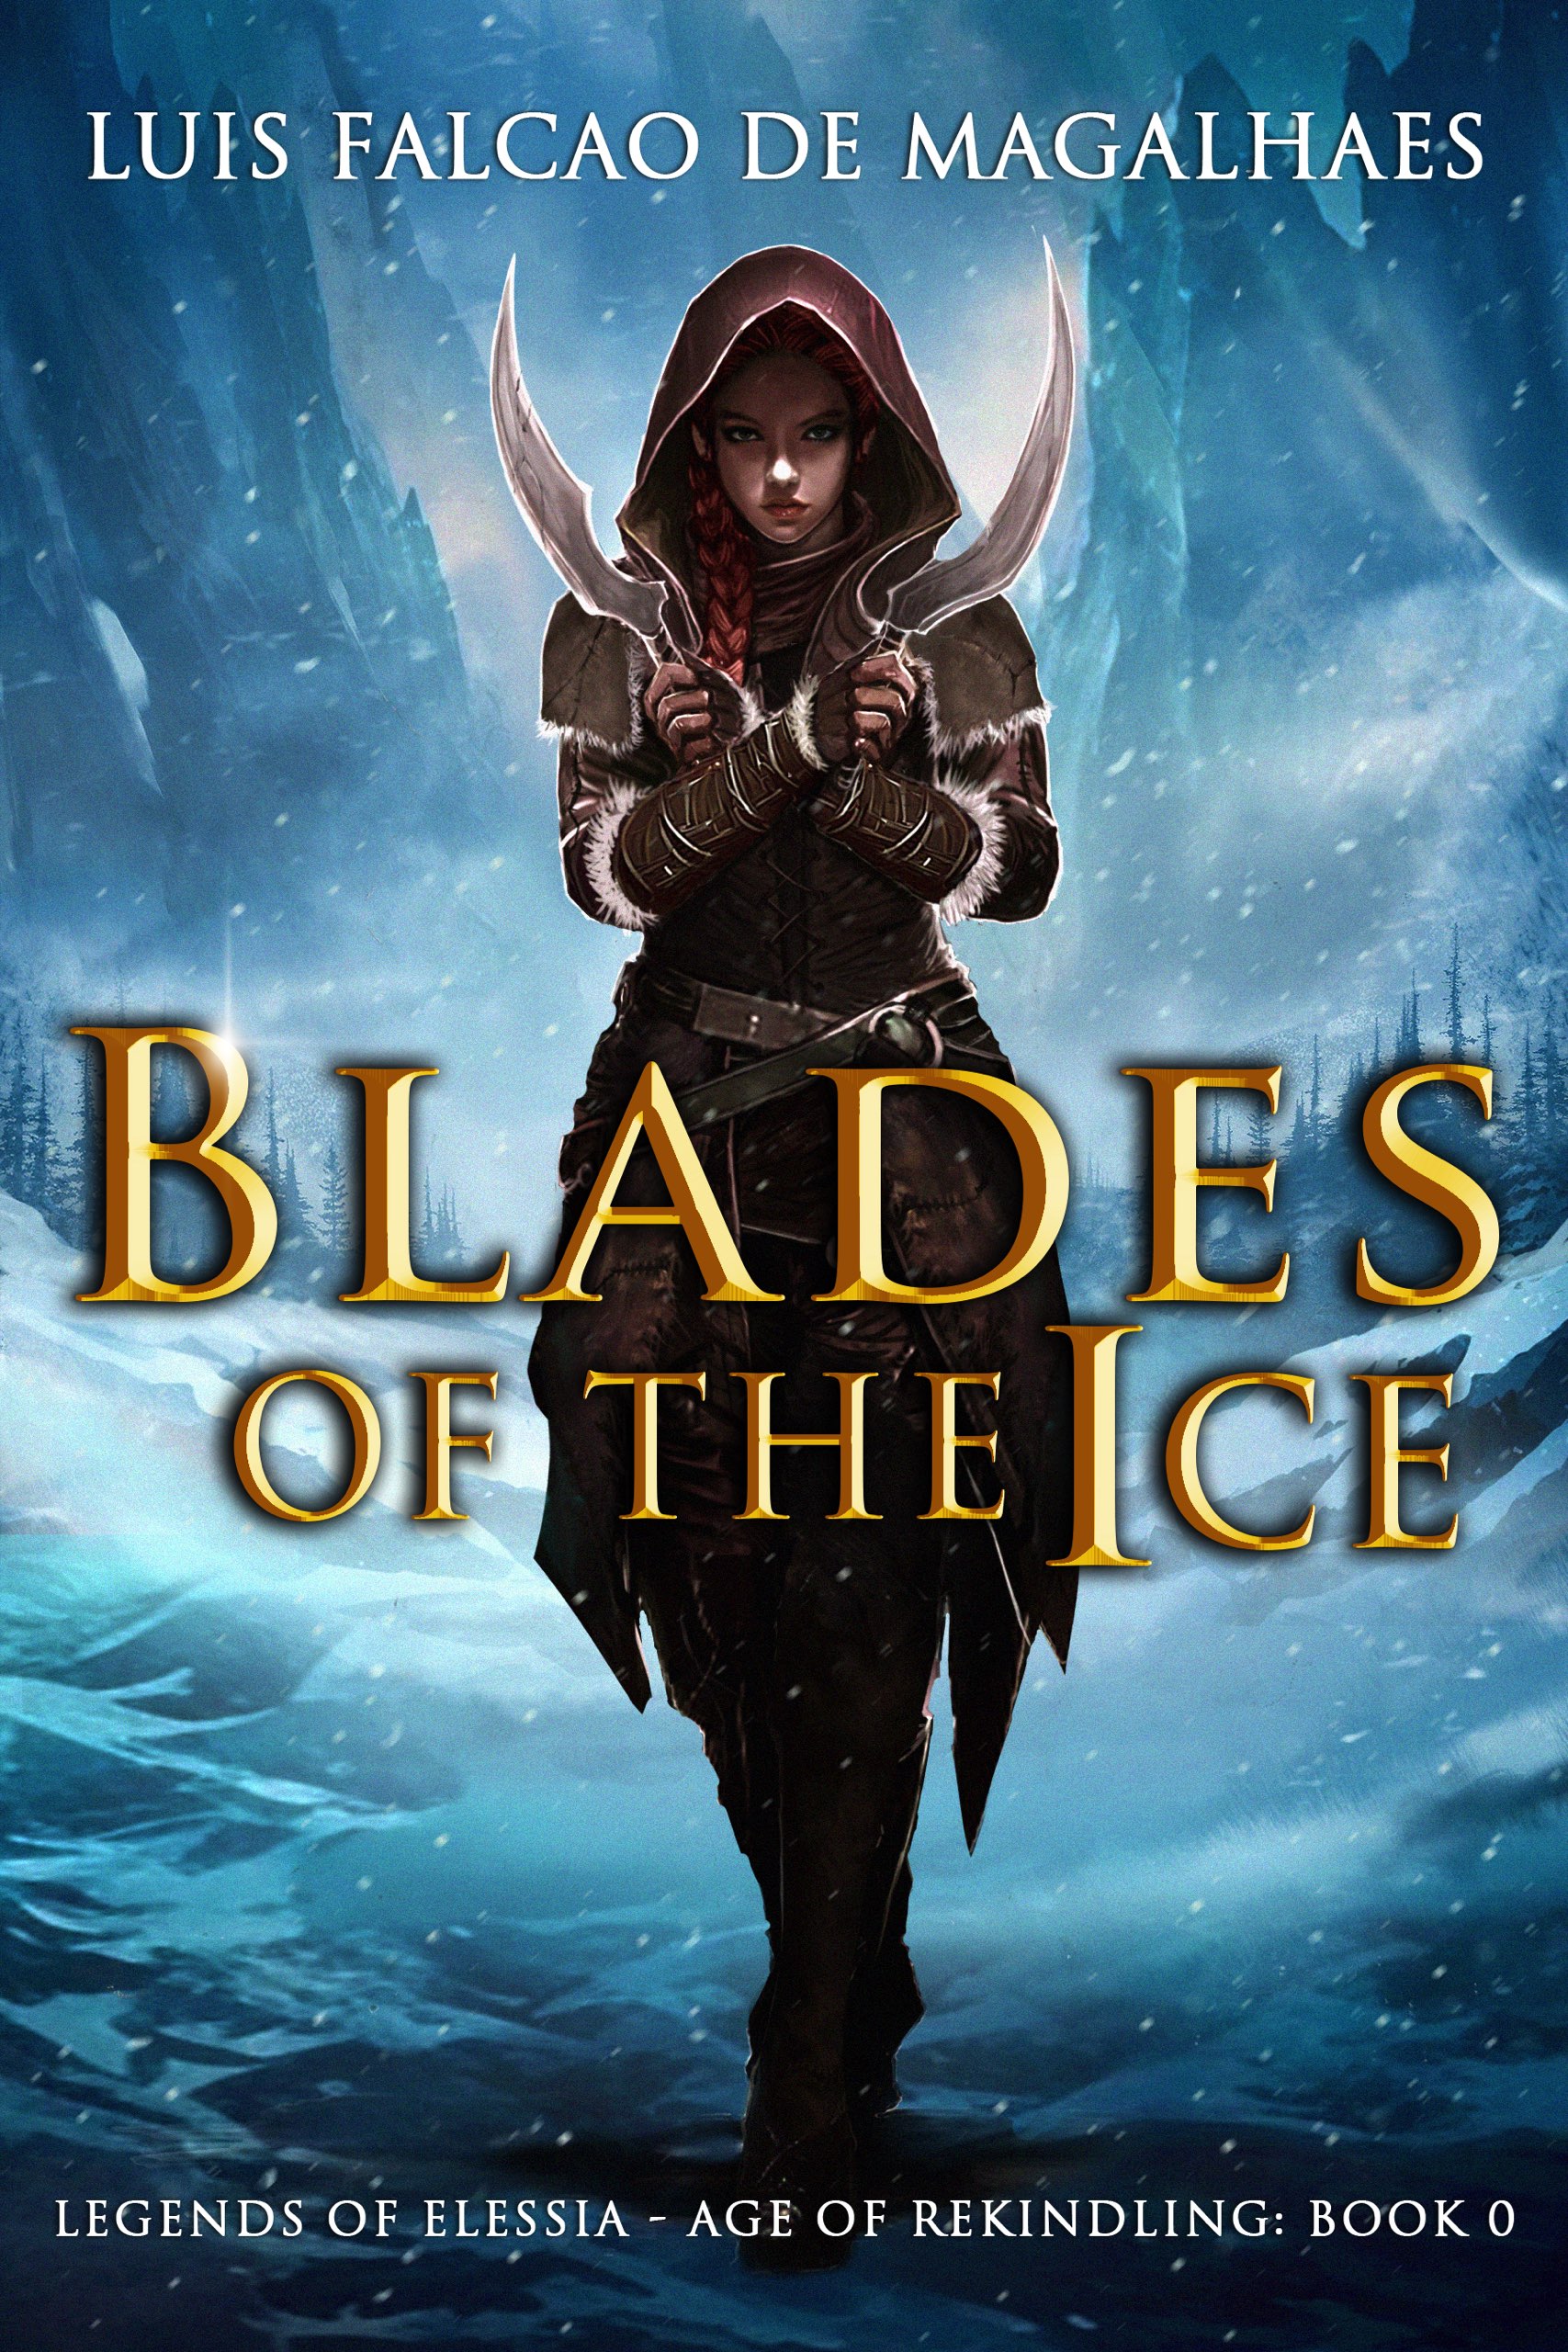 Blades of the Ice